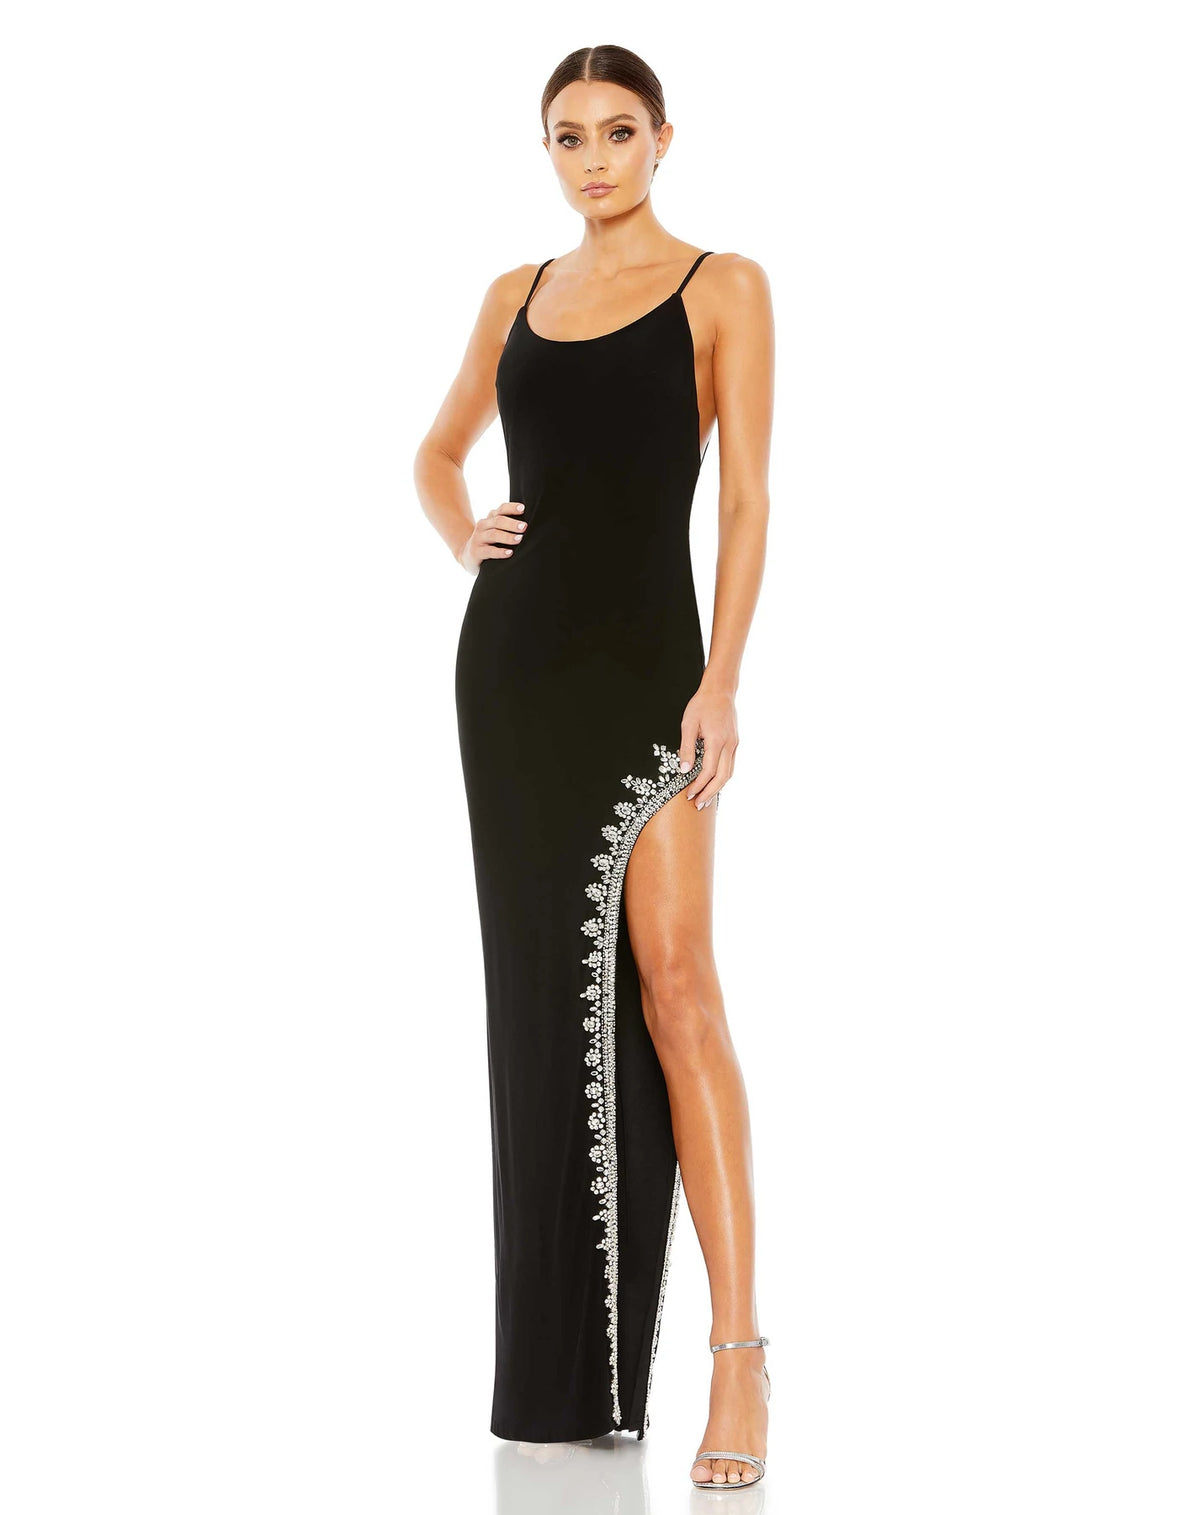 This elegant Mac Duggal, long, black, asymmetric evening gown with sexy crystal detail on the skirt is and an open back is a met gala inspired gown for a very special occasion! This elegant evening dress is the perfect dress perfect for proms, black-tie affairs, wedding guest and special events!